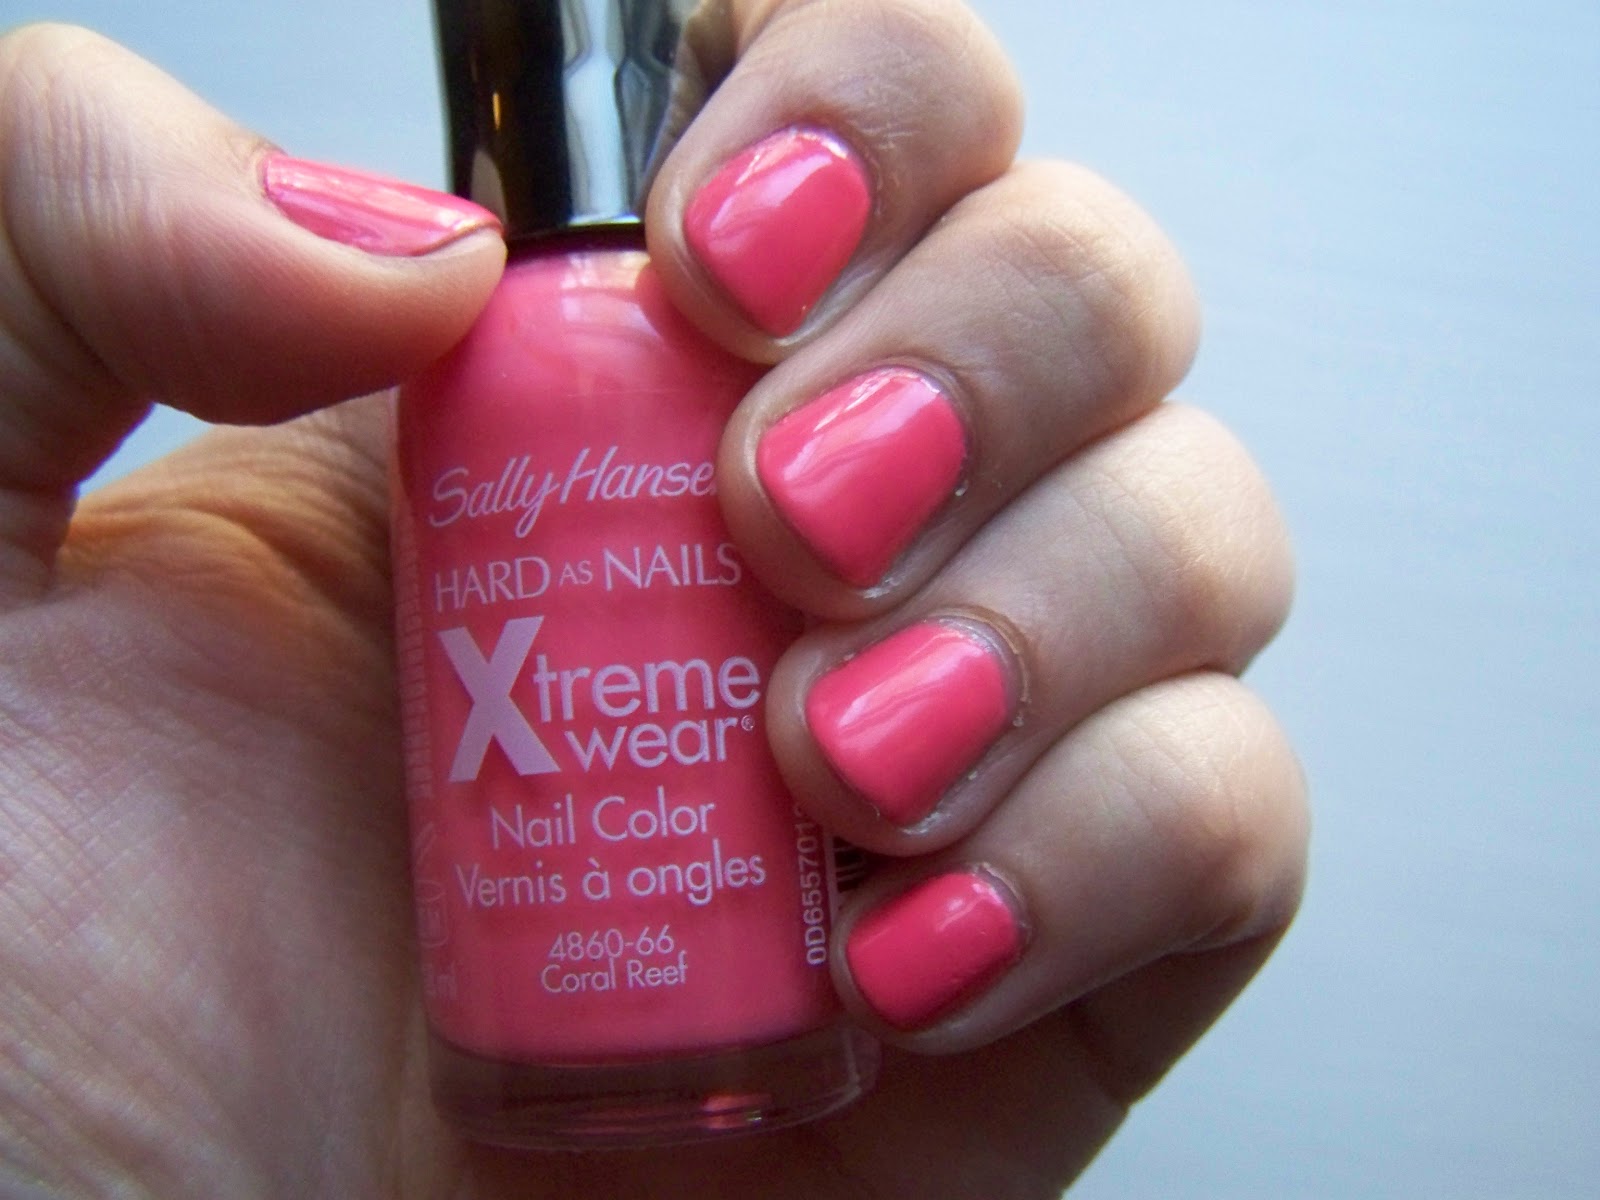 6. Sally Hansen Hard as Nails Xtreme Wear Nail Color, Coral Reef - wide 3